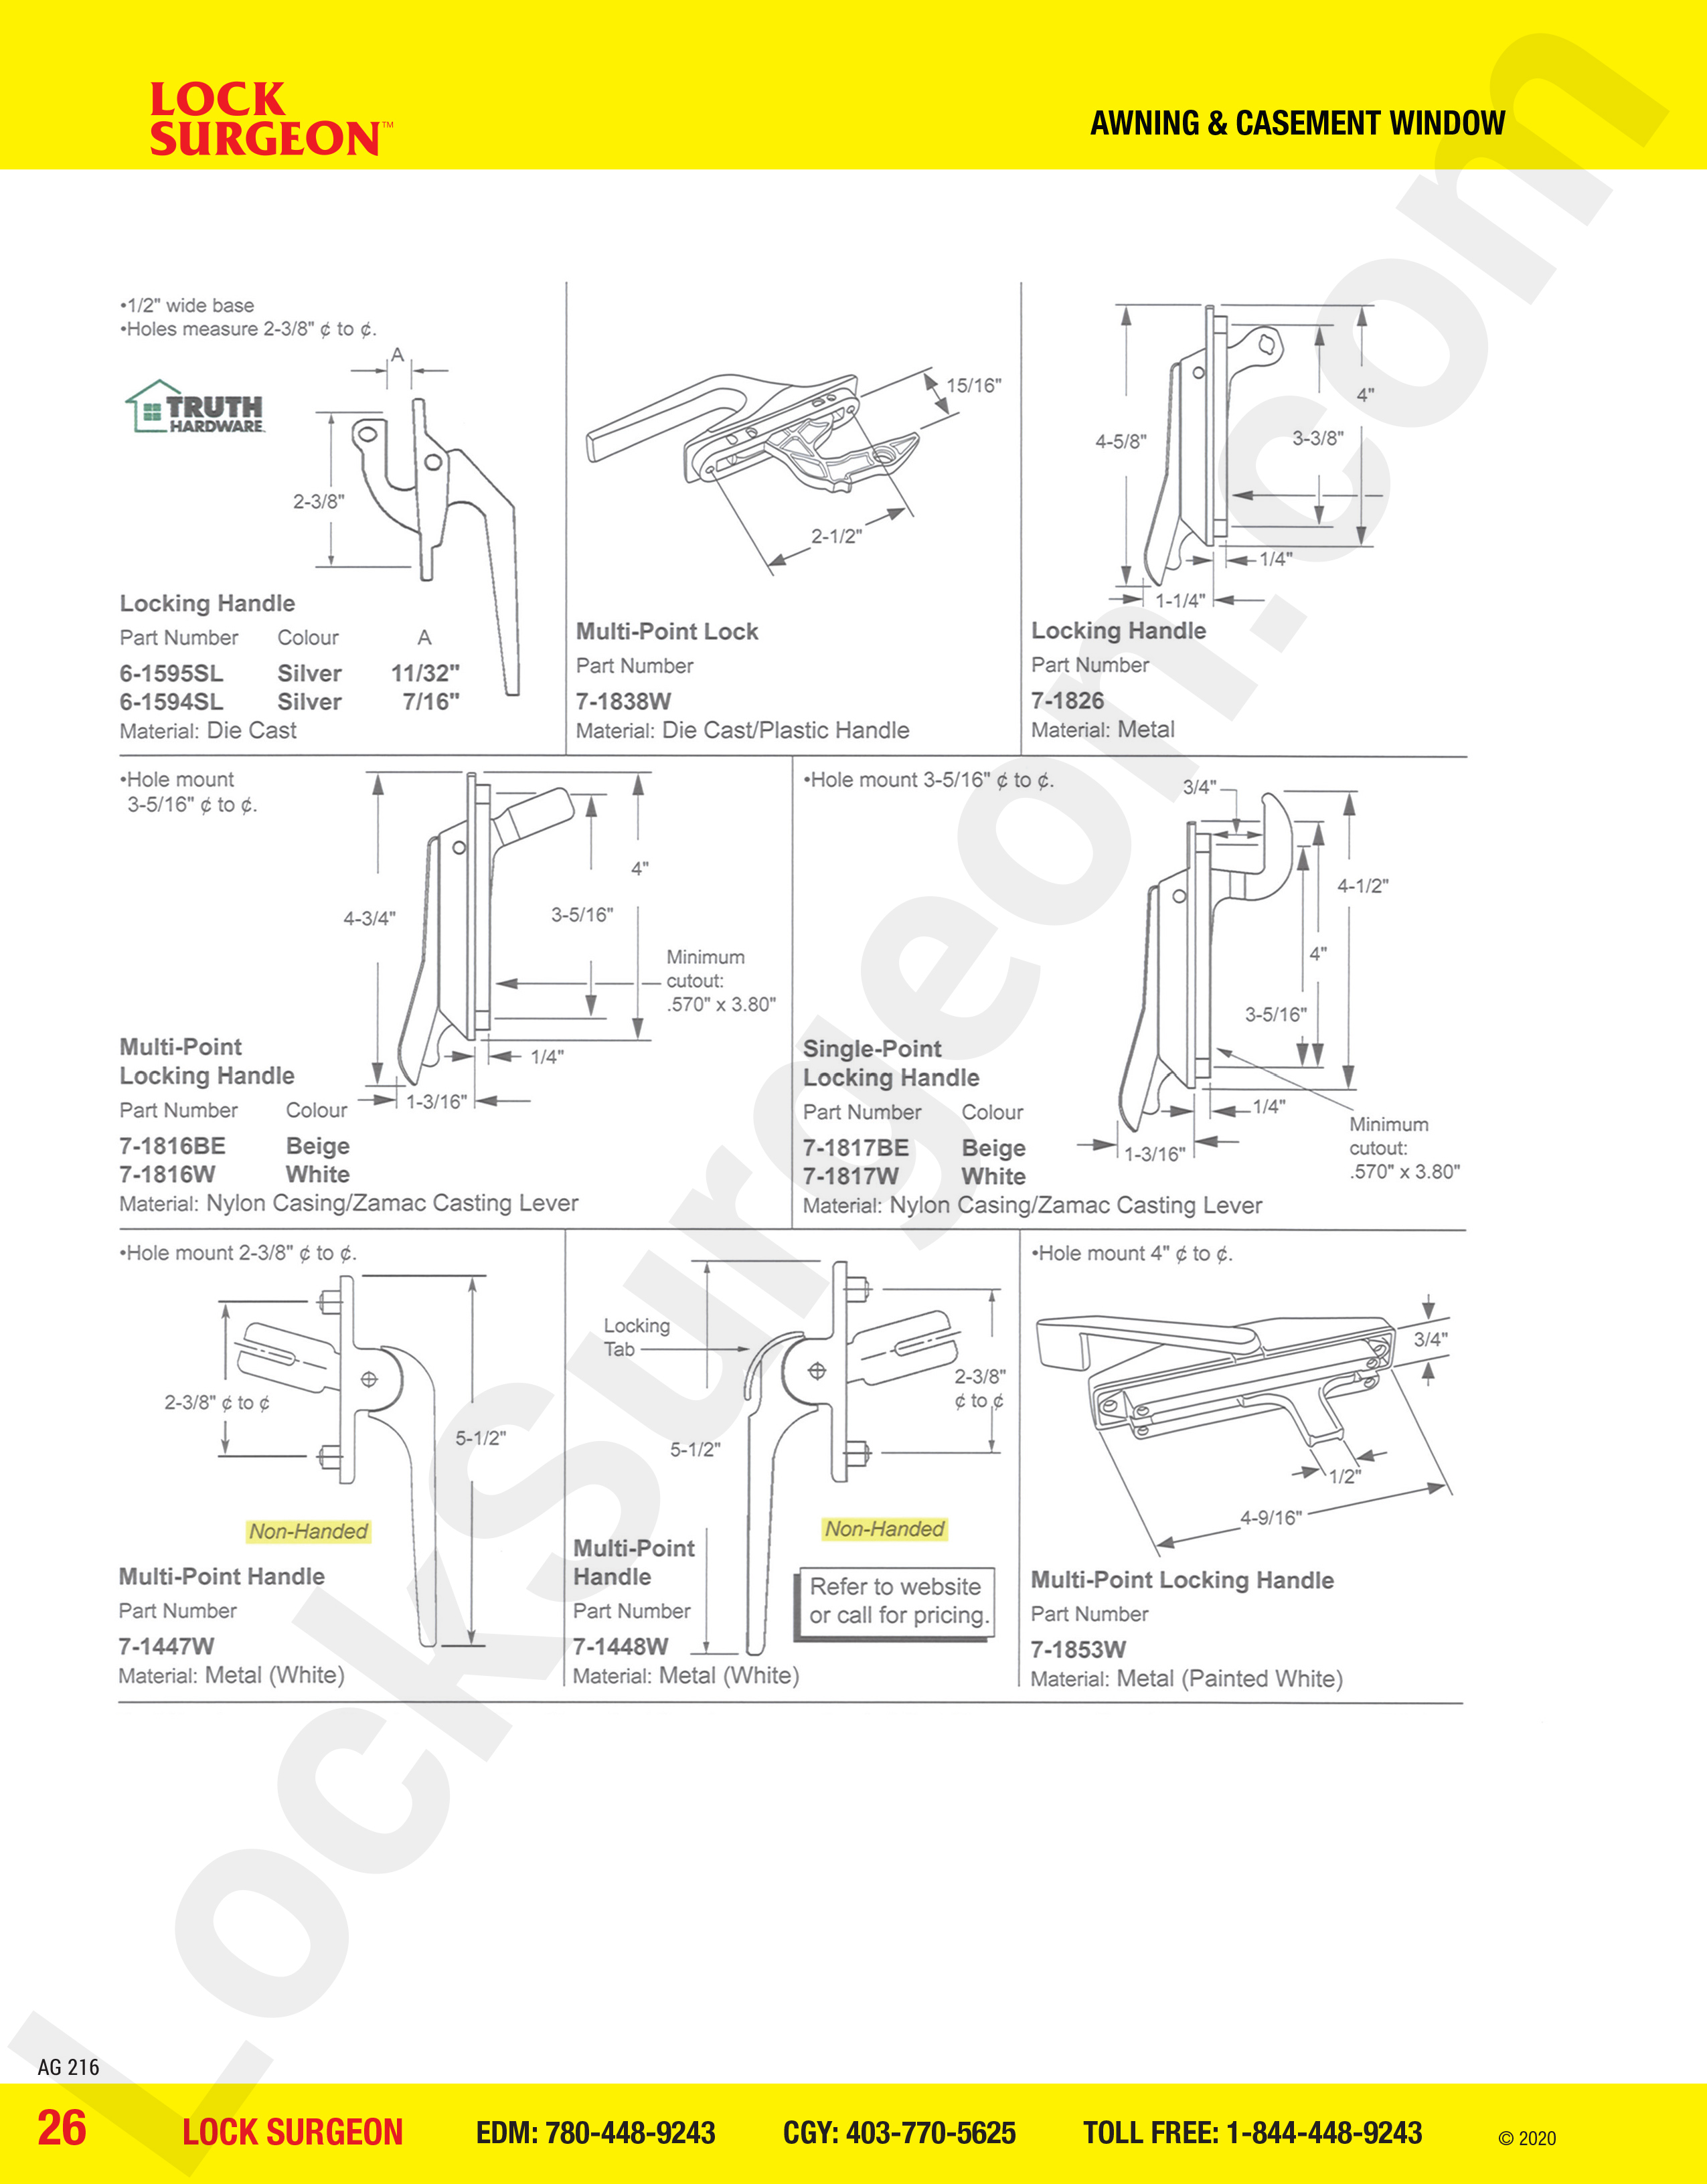 awning and casement window parts for locking handles.